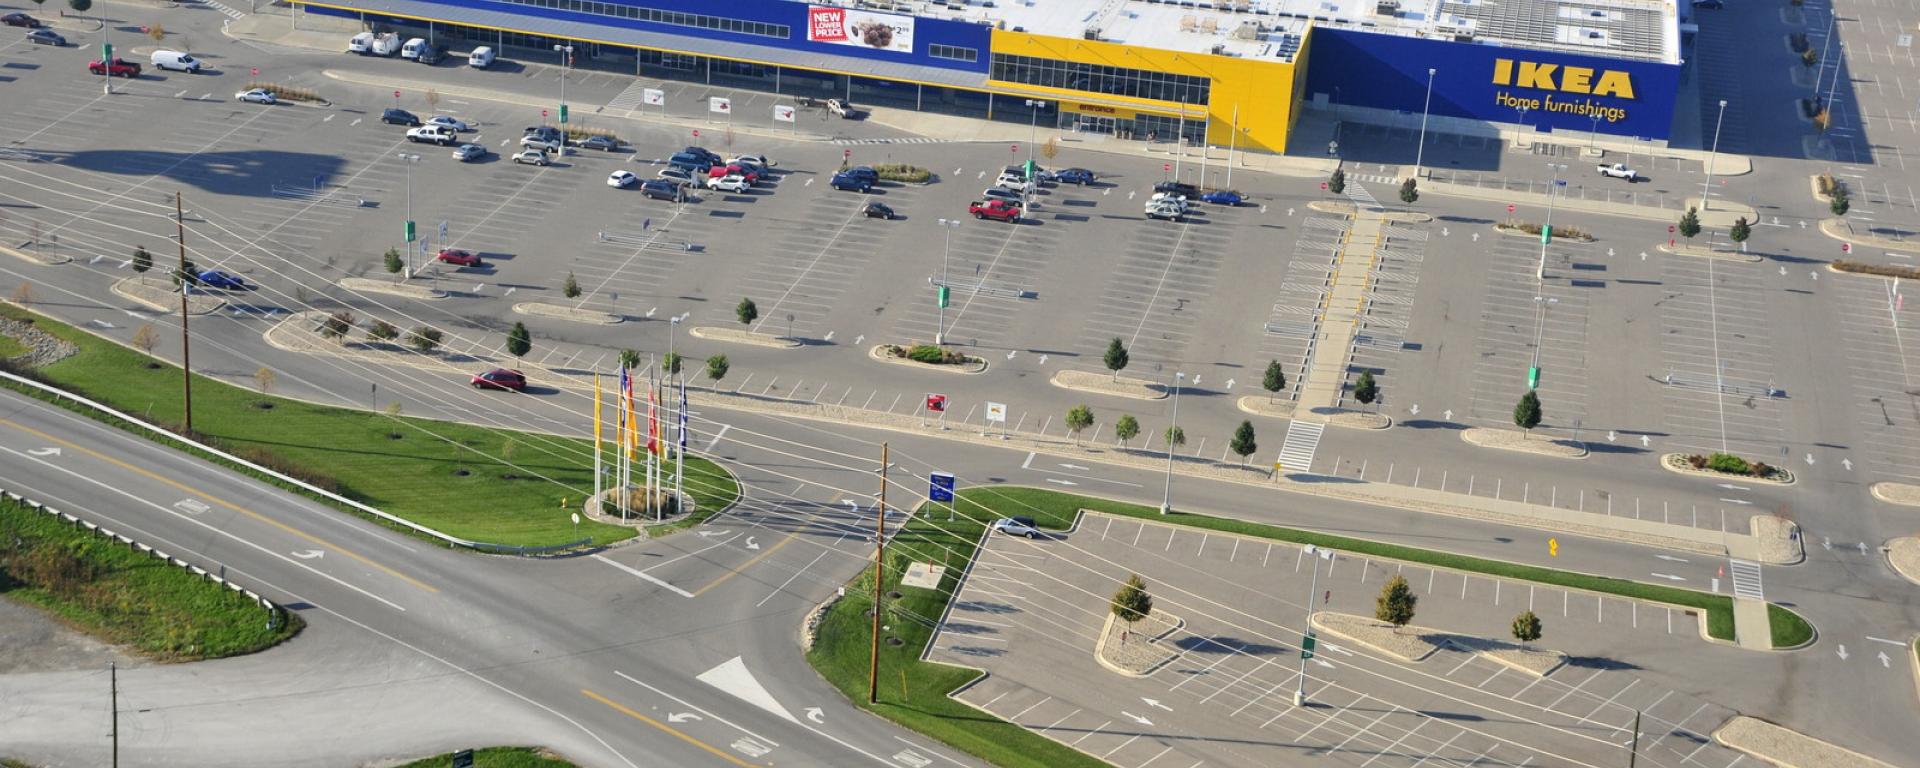 aerial of entrance into ikea from roadway